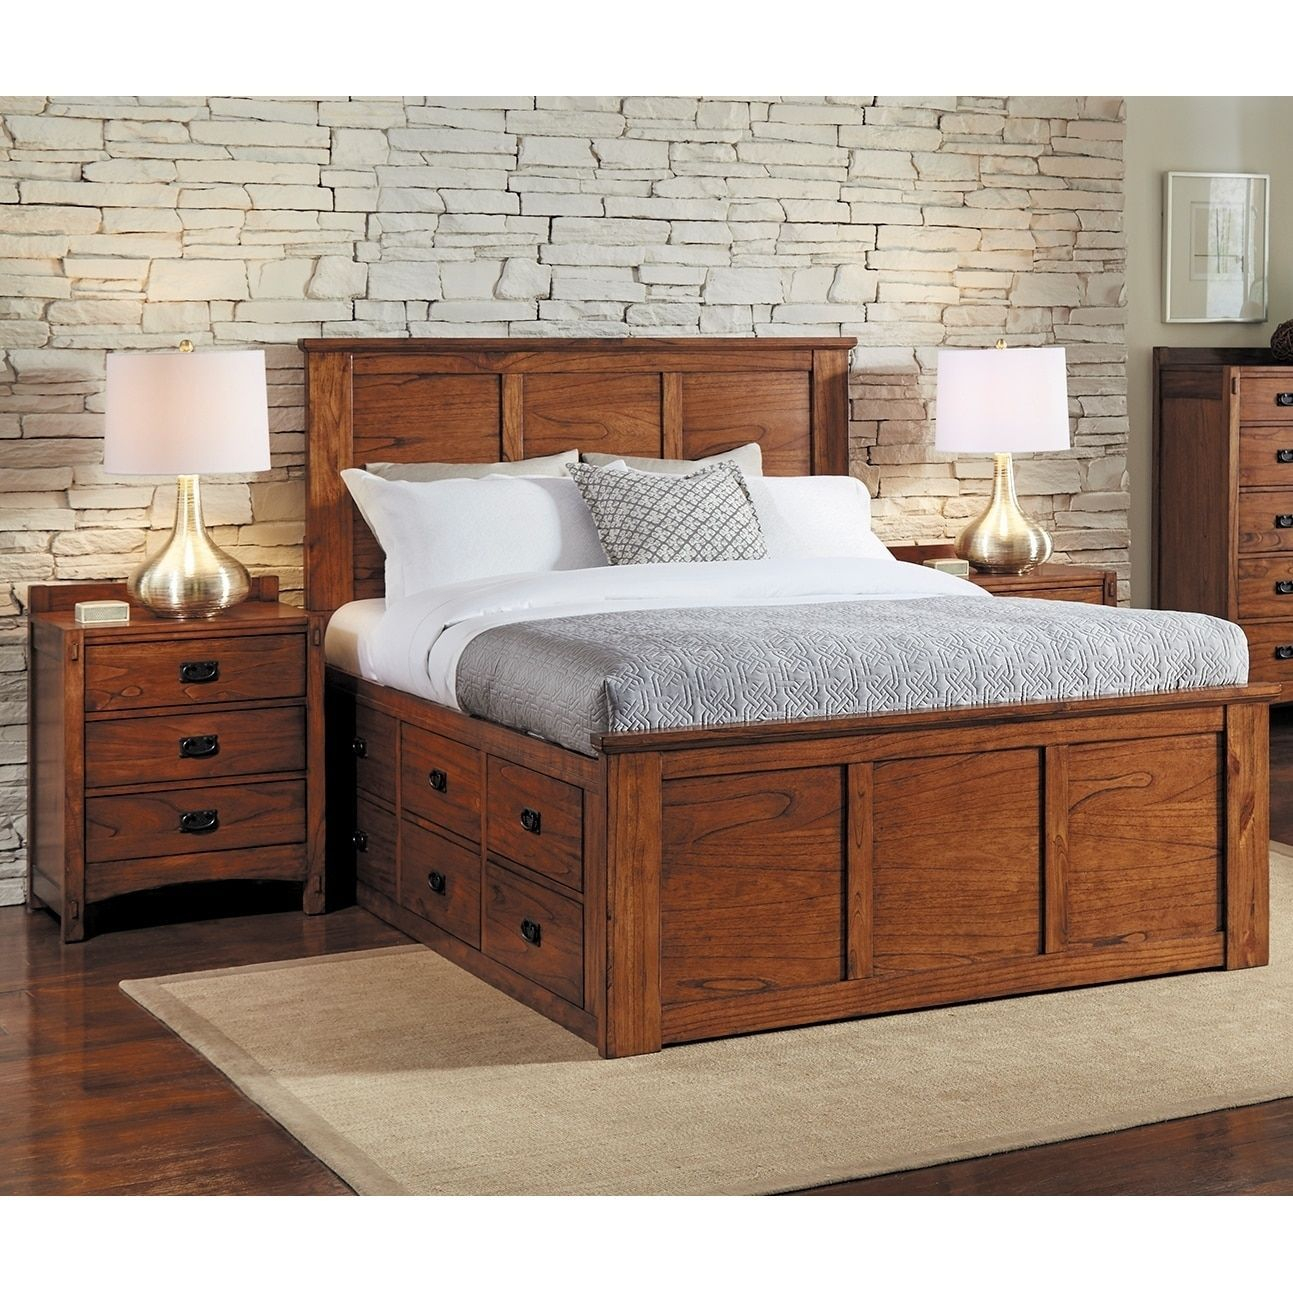 Aira 3 Piece Solid Wood Queen Storage Bedroom Set In 2019 Bedding for dimensions 1293 X 1293